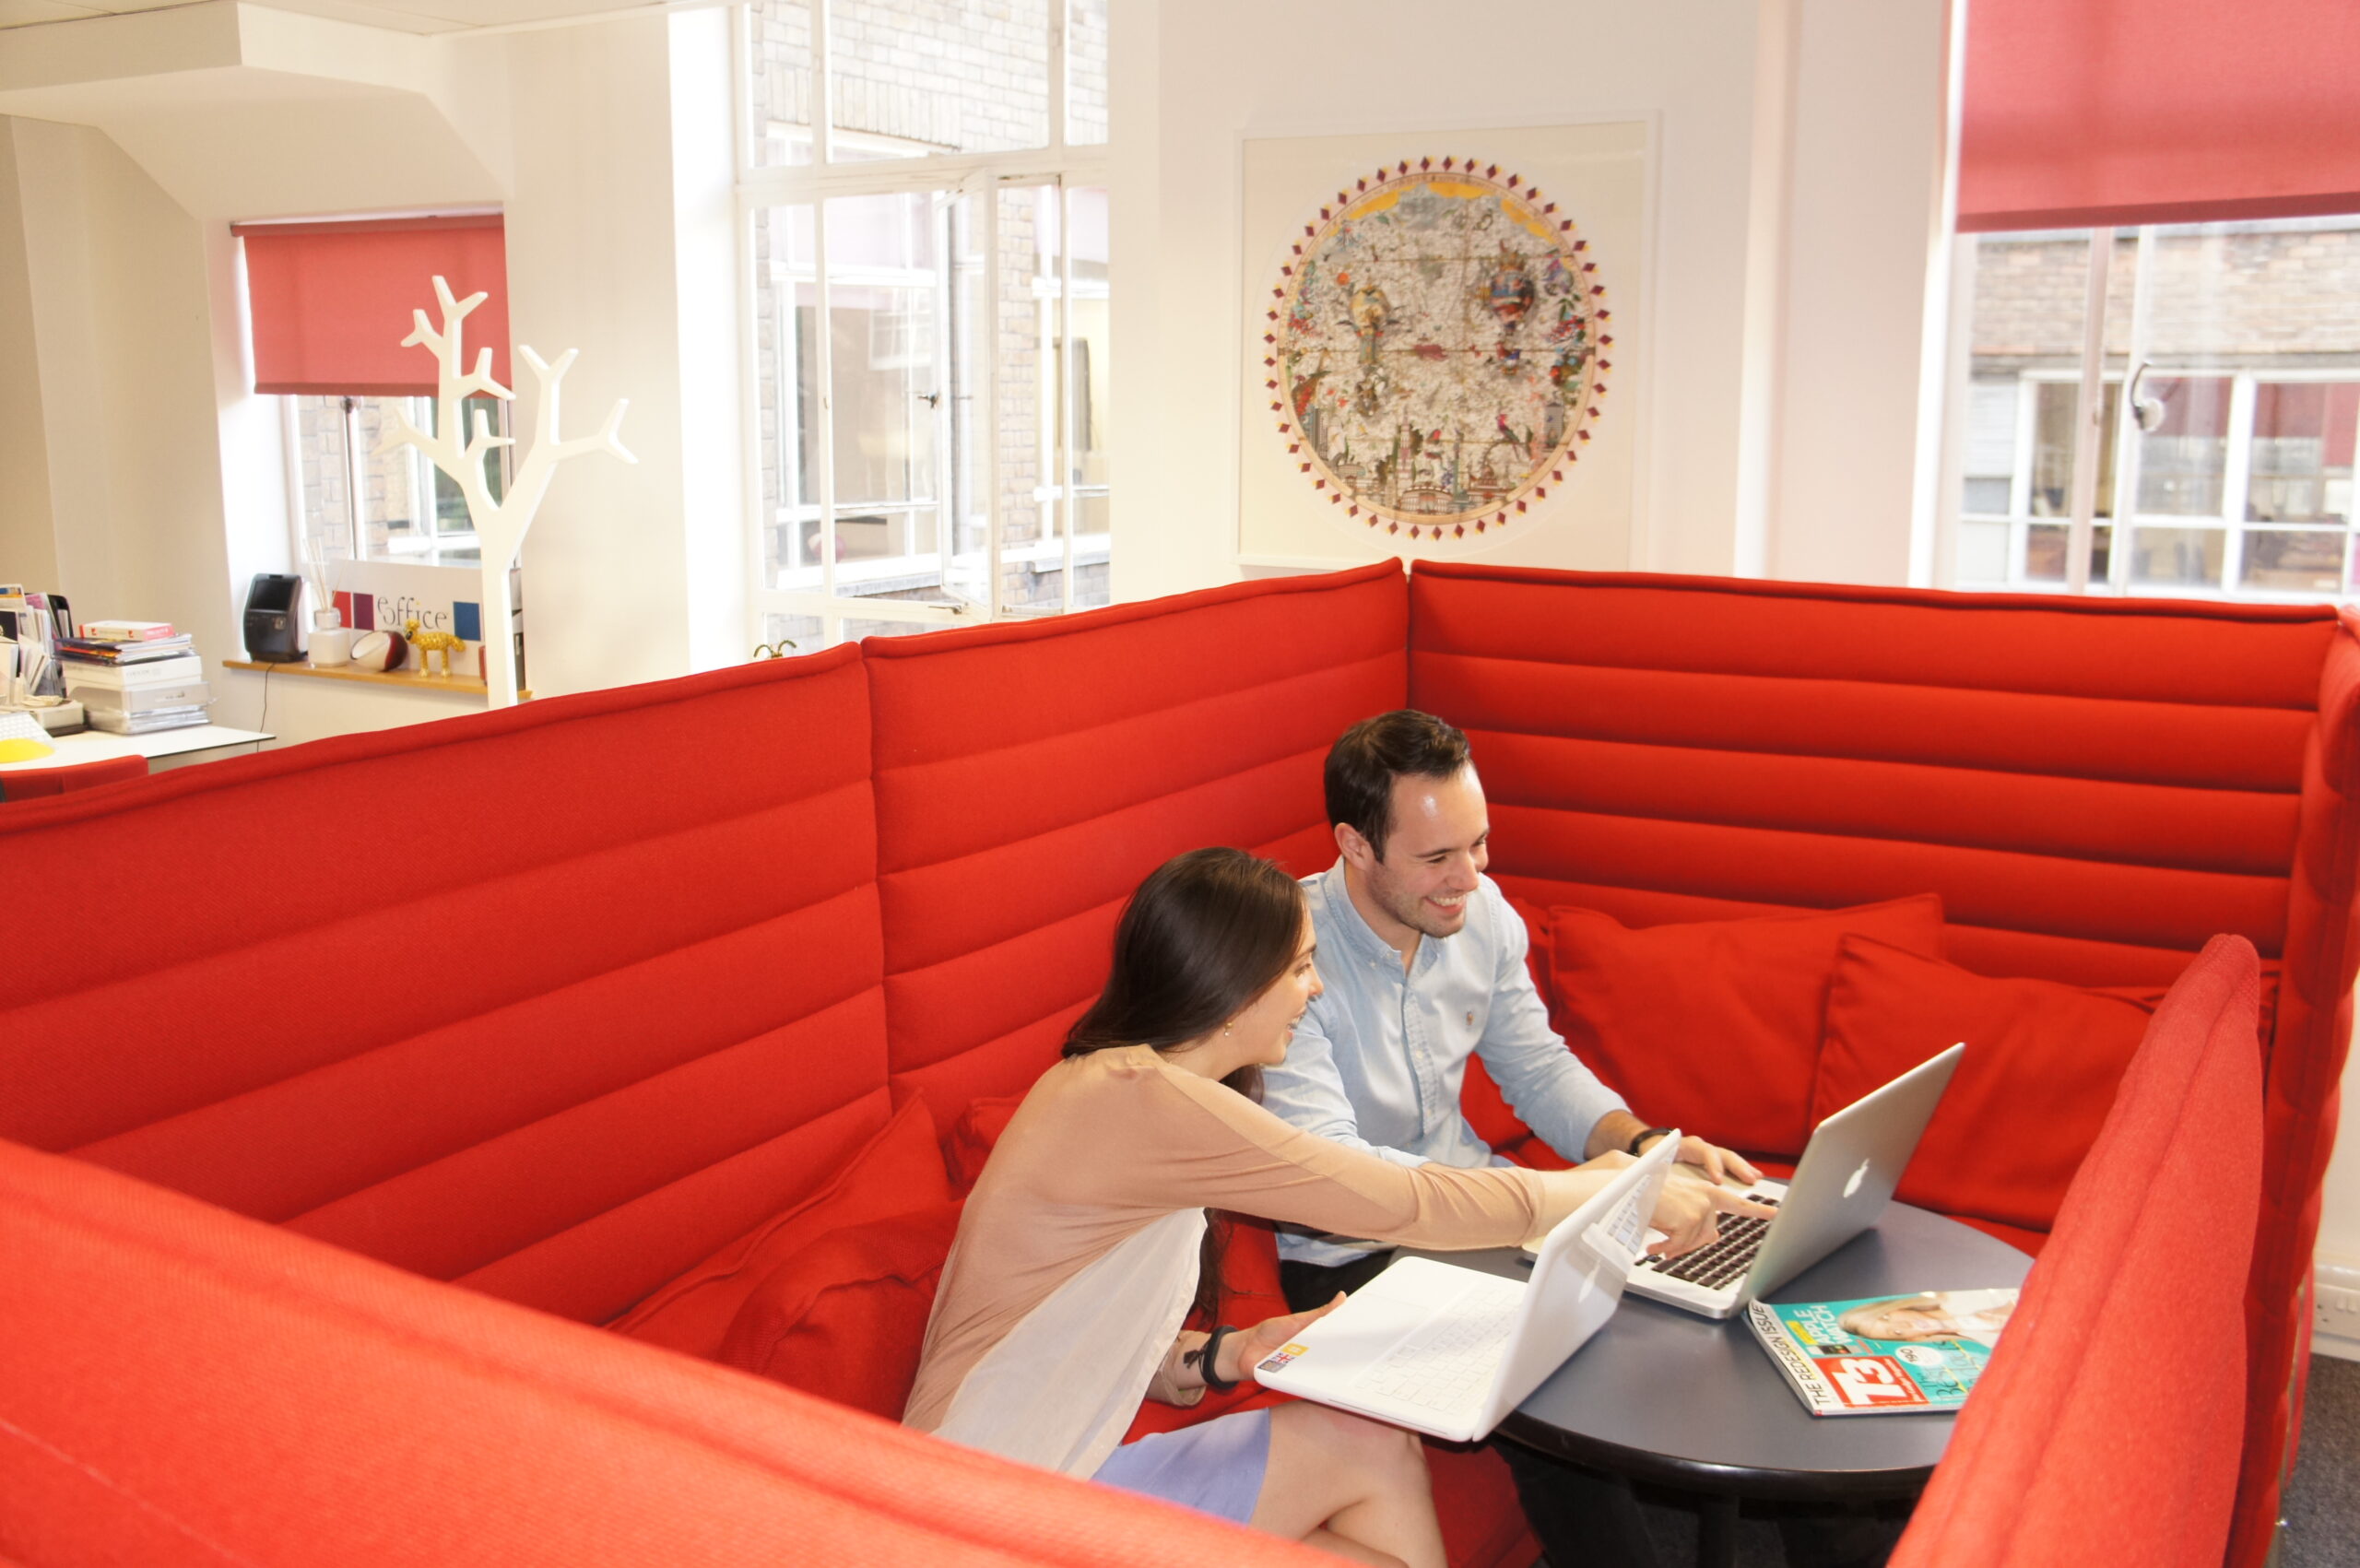 Top 3 reasons why people thrive in coworking spaces